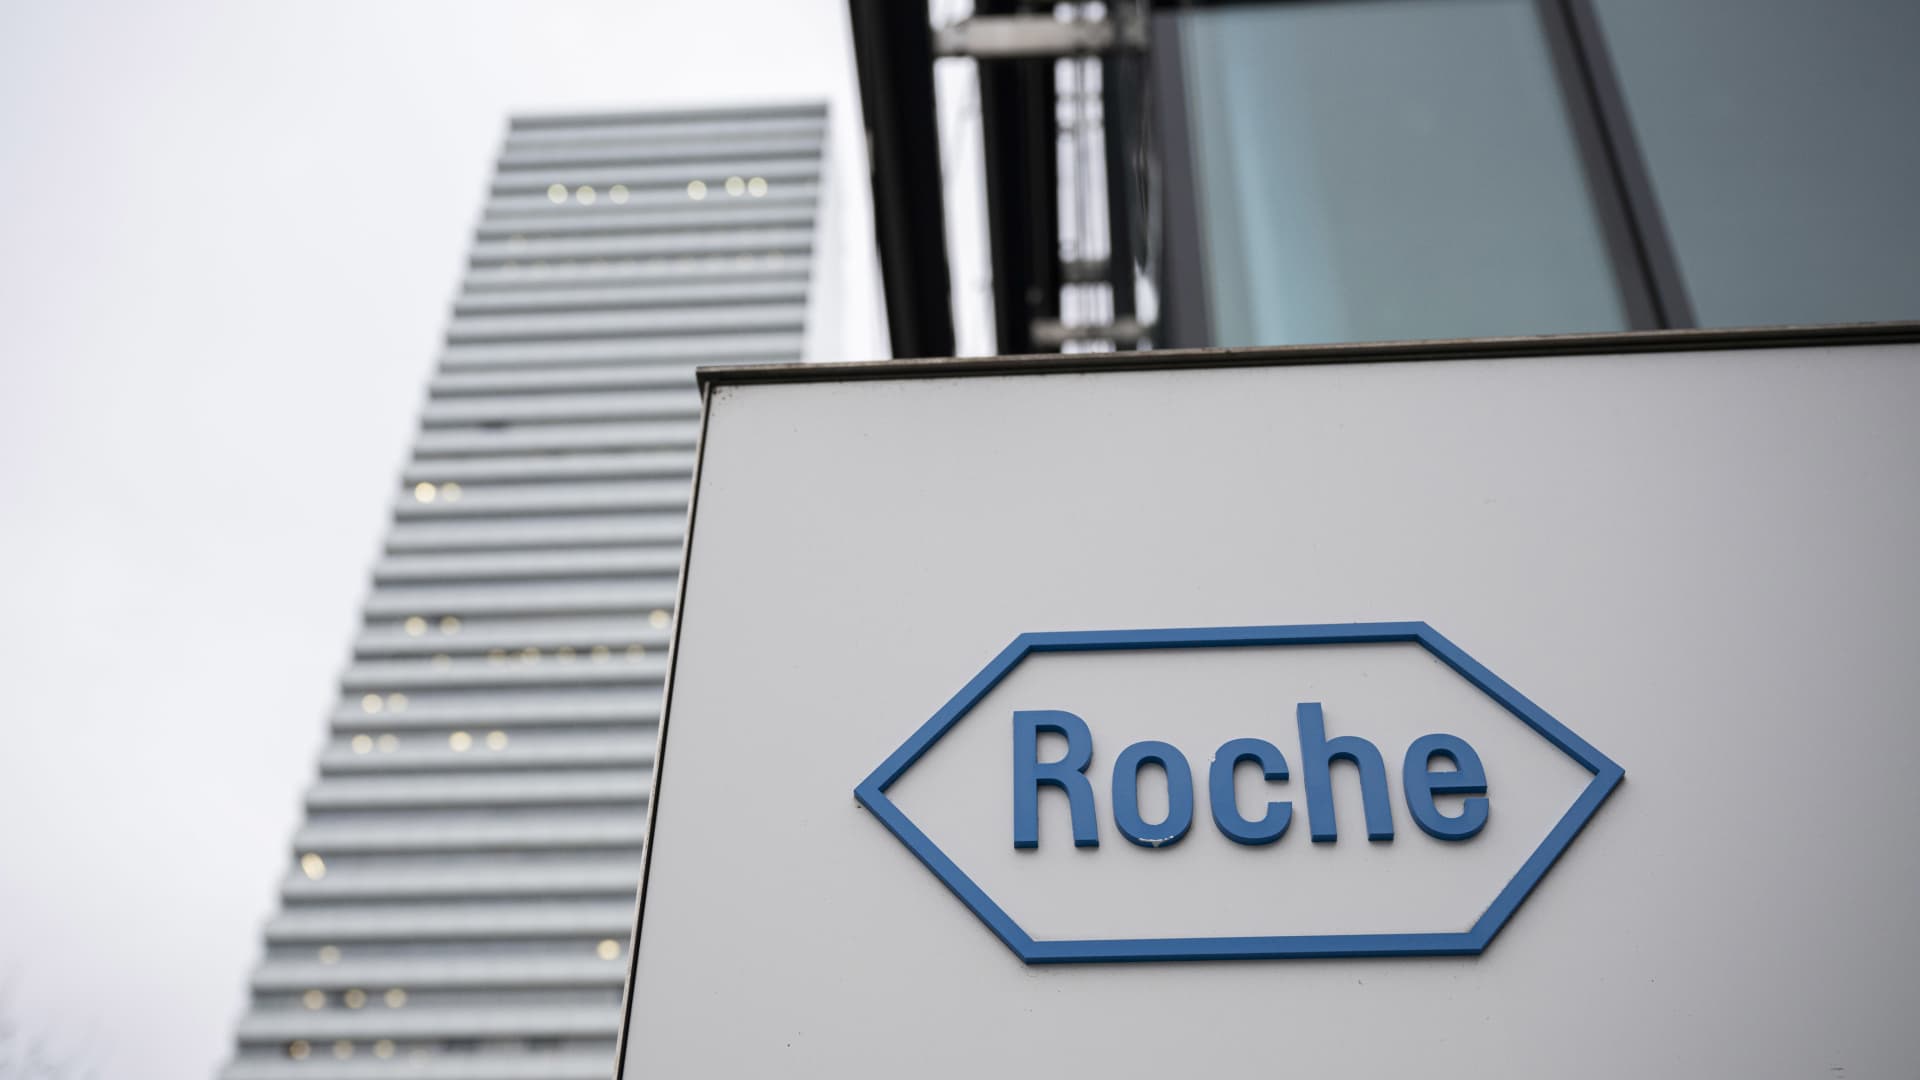 Roche weight loss drug shows promising results in early trial